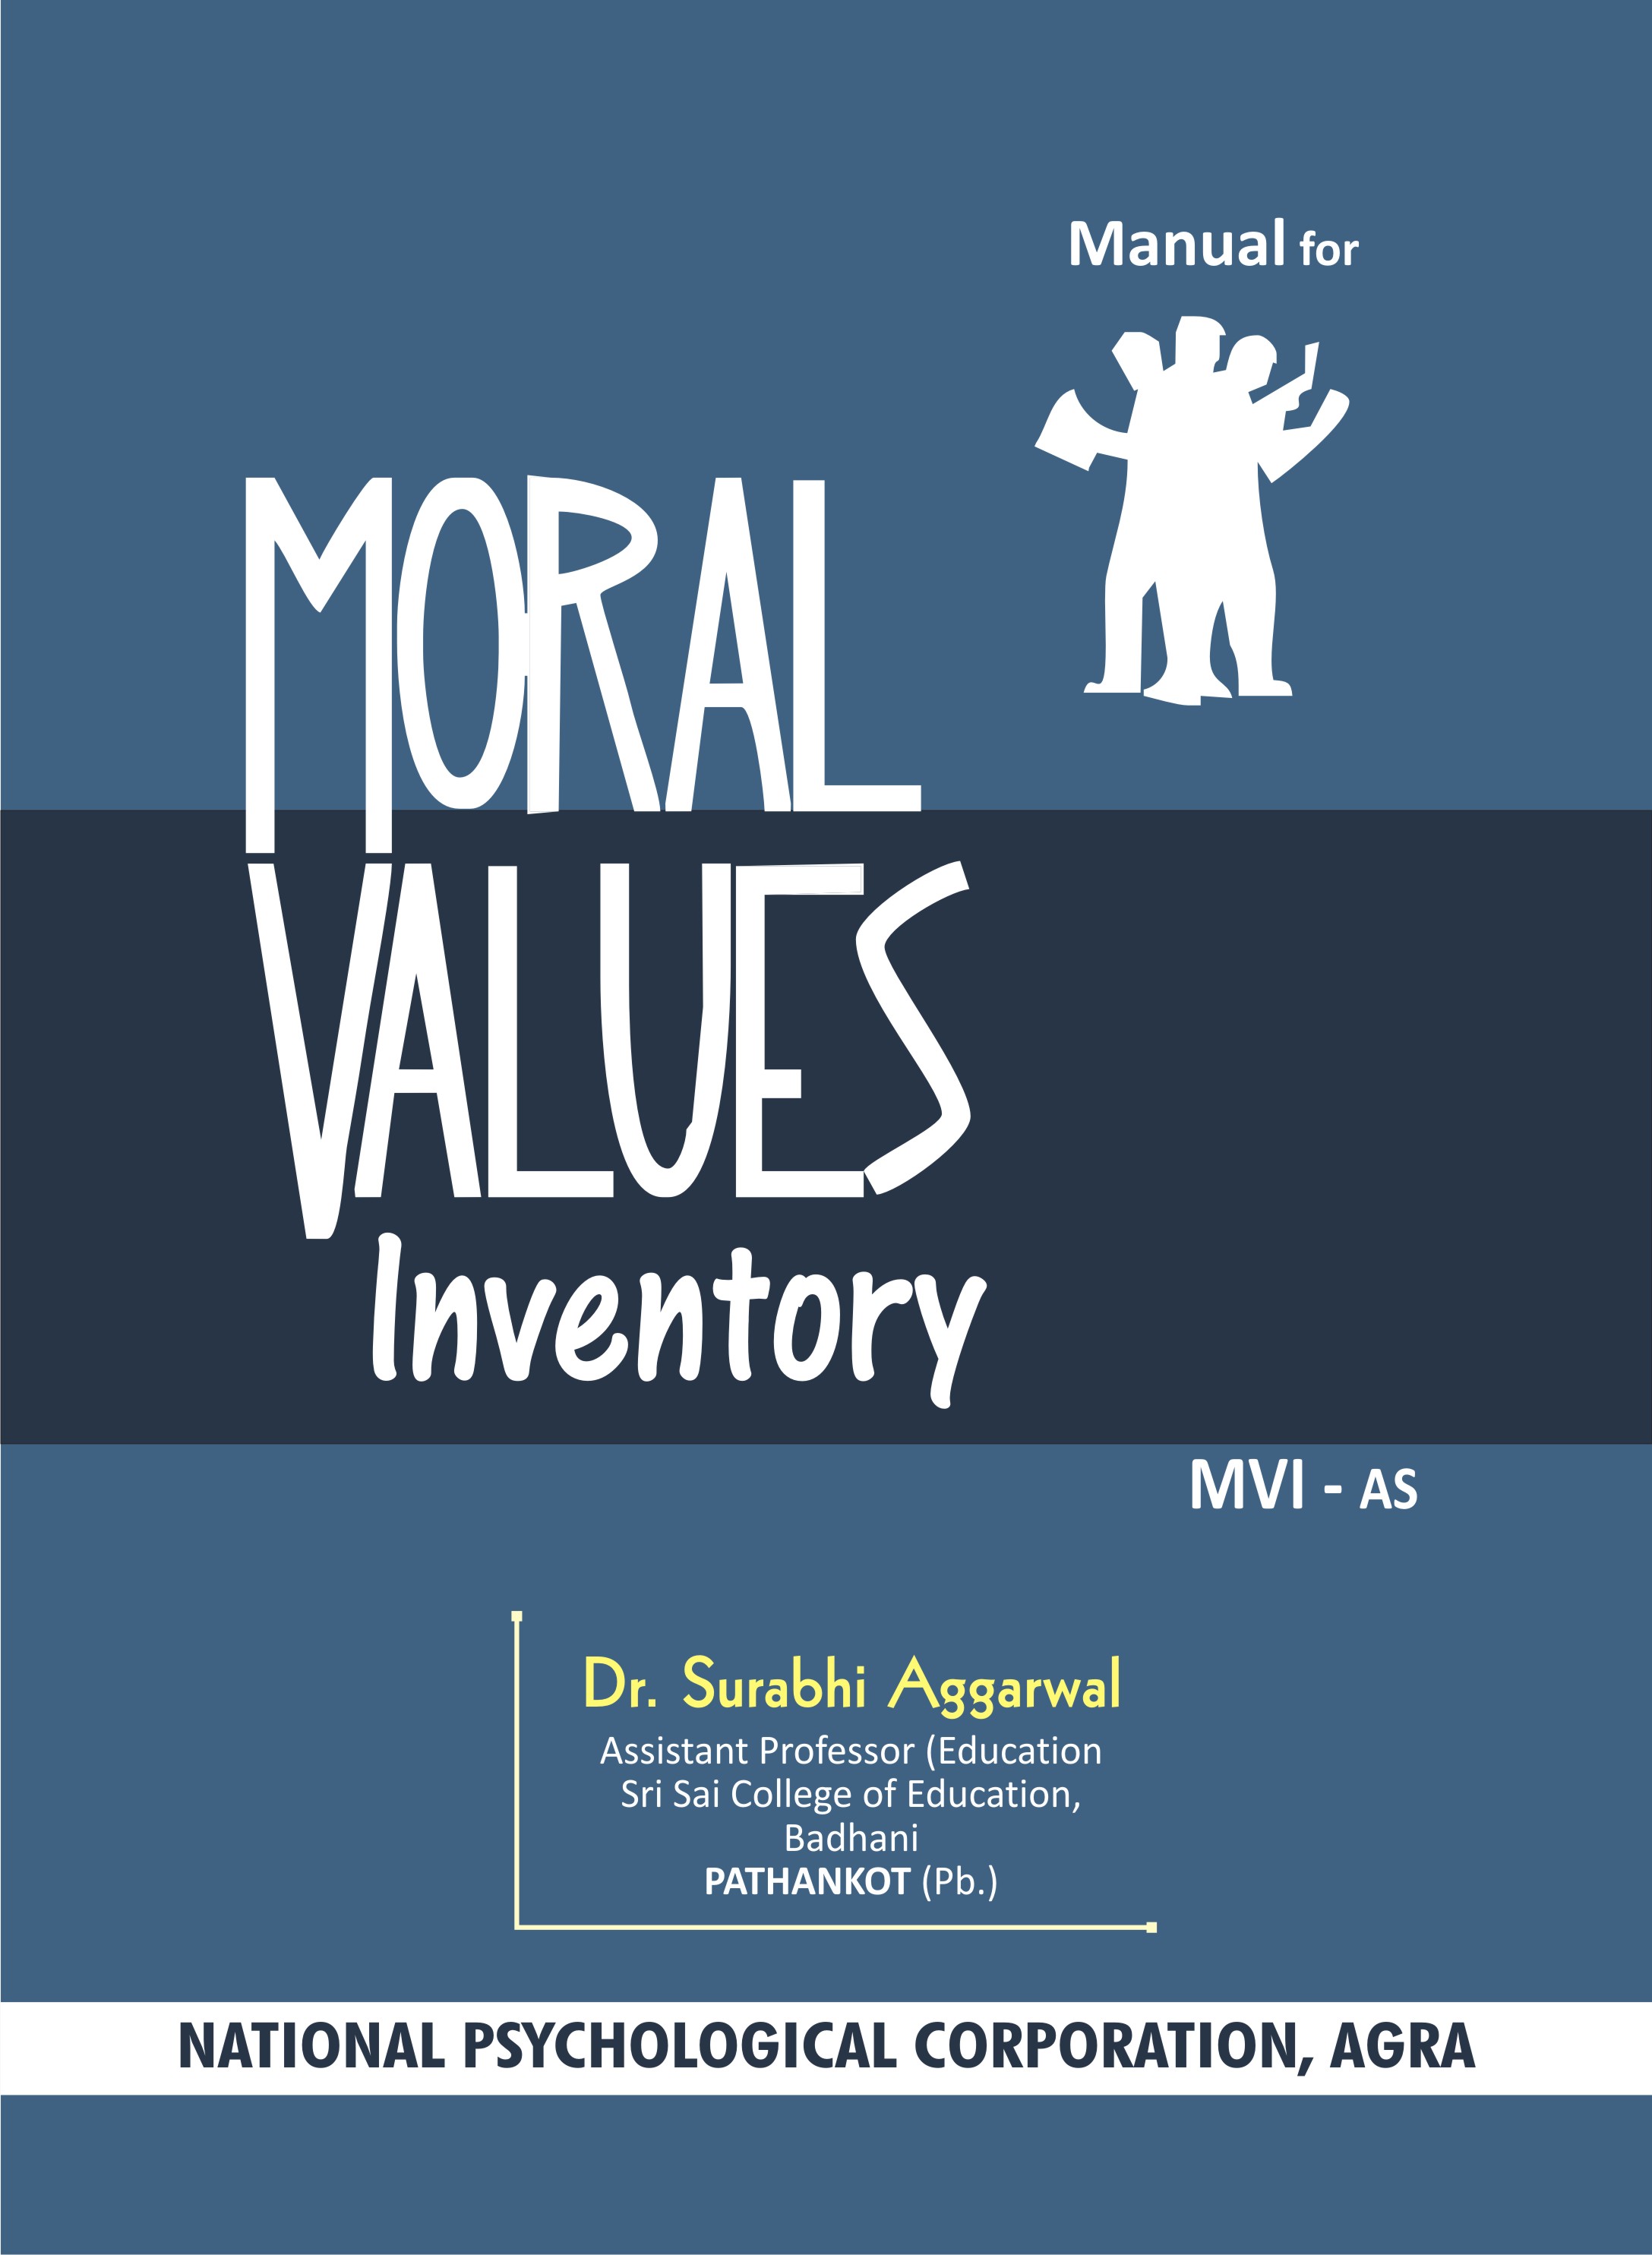 MORAL-VALUES-INVENTORY